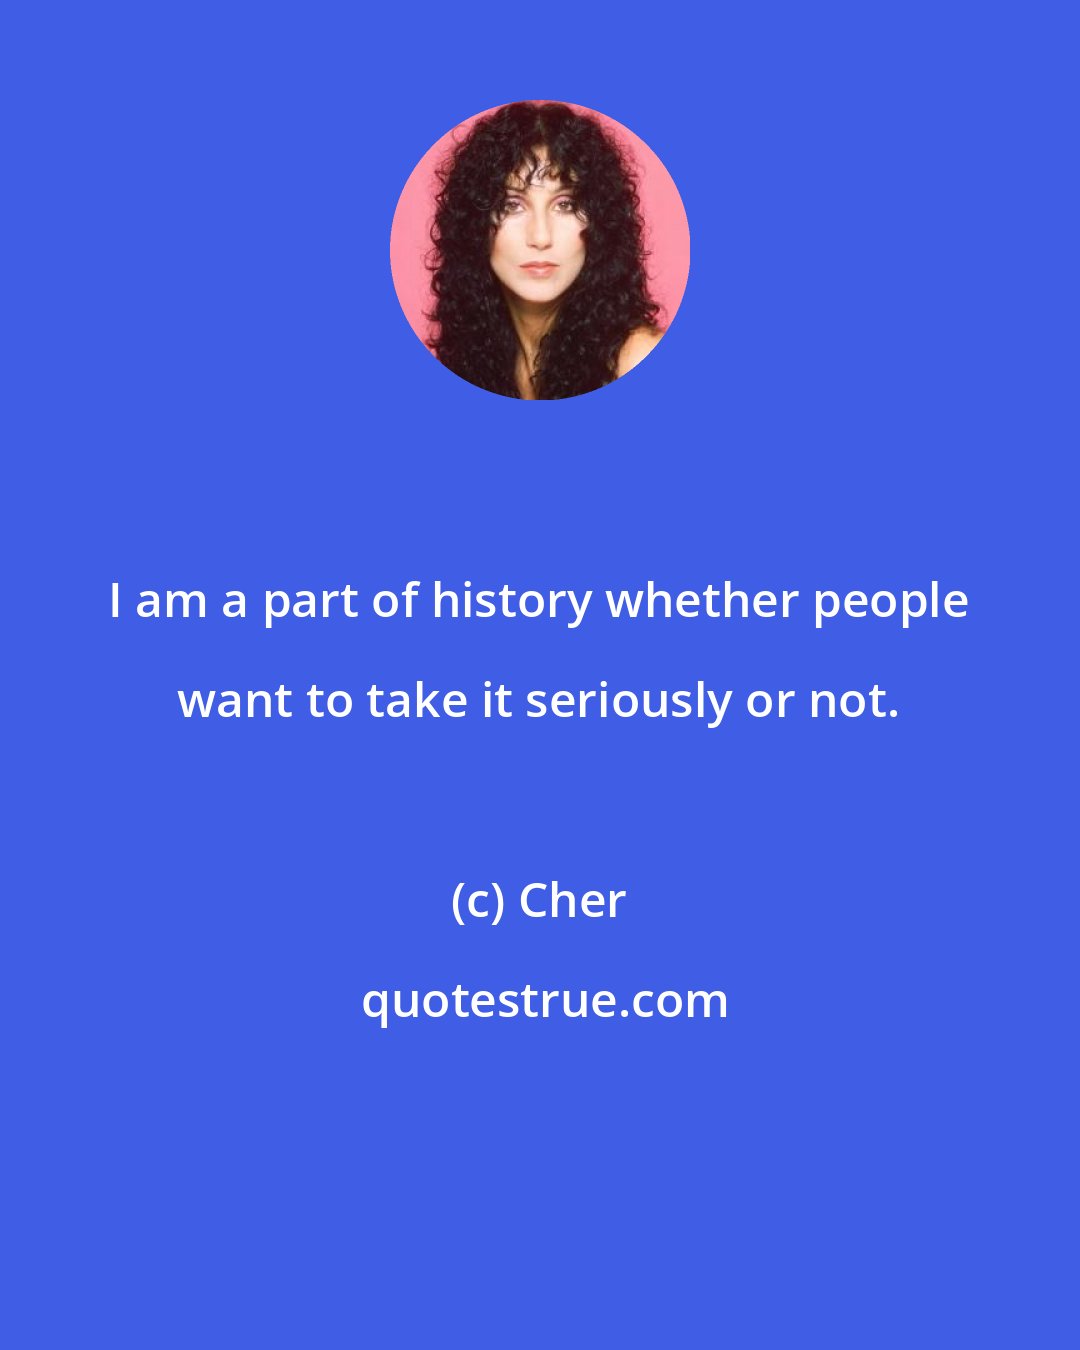 Cher: I am a part of history whether people want to take it seriously or not.